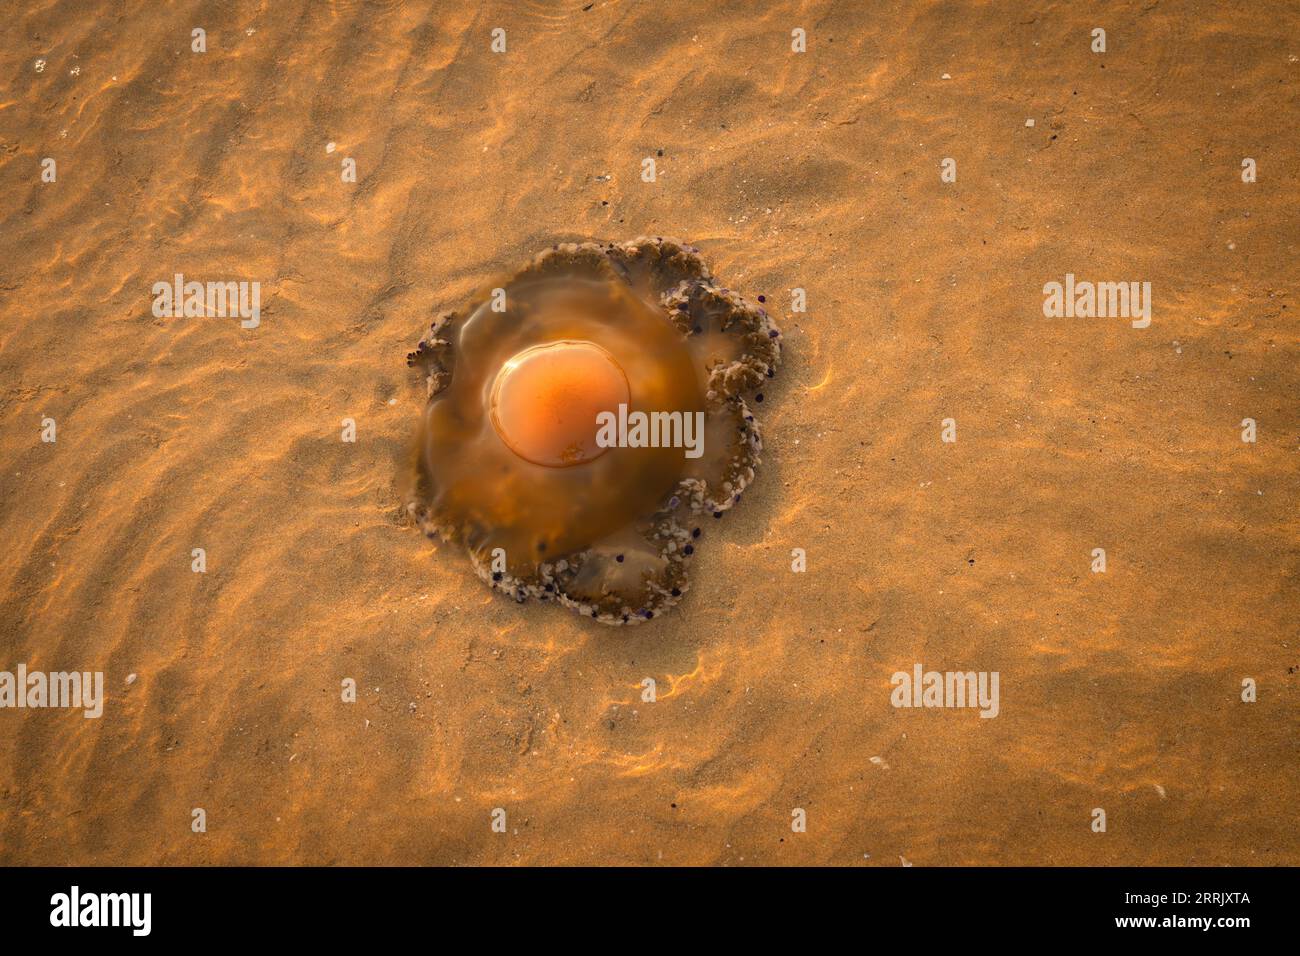 Jellyfish in the Adriatic Sea near the shore in shallow water Stock Photo